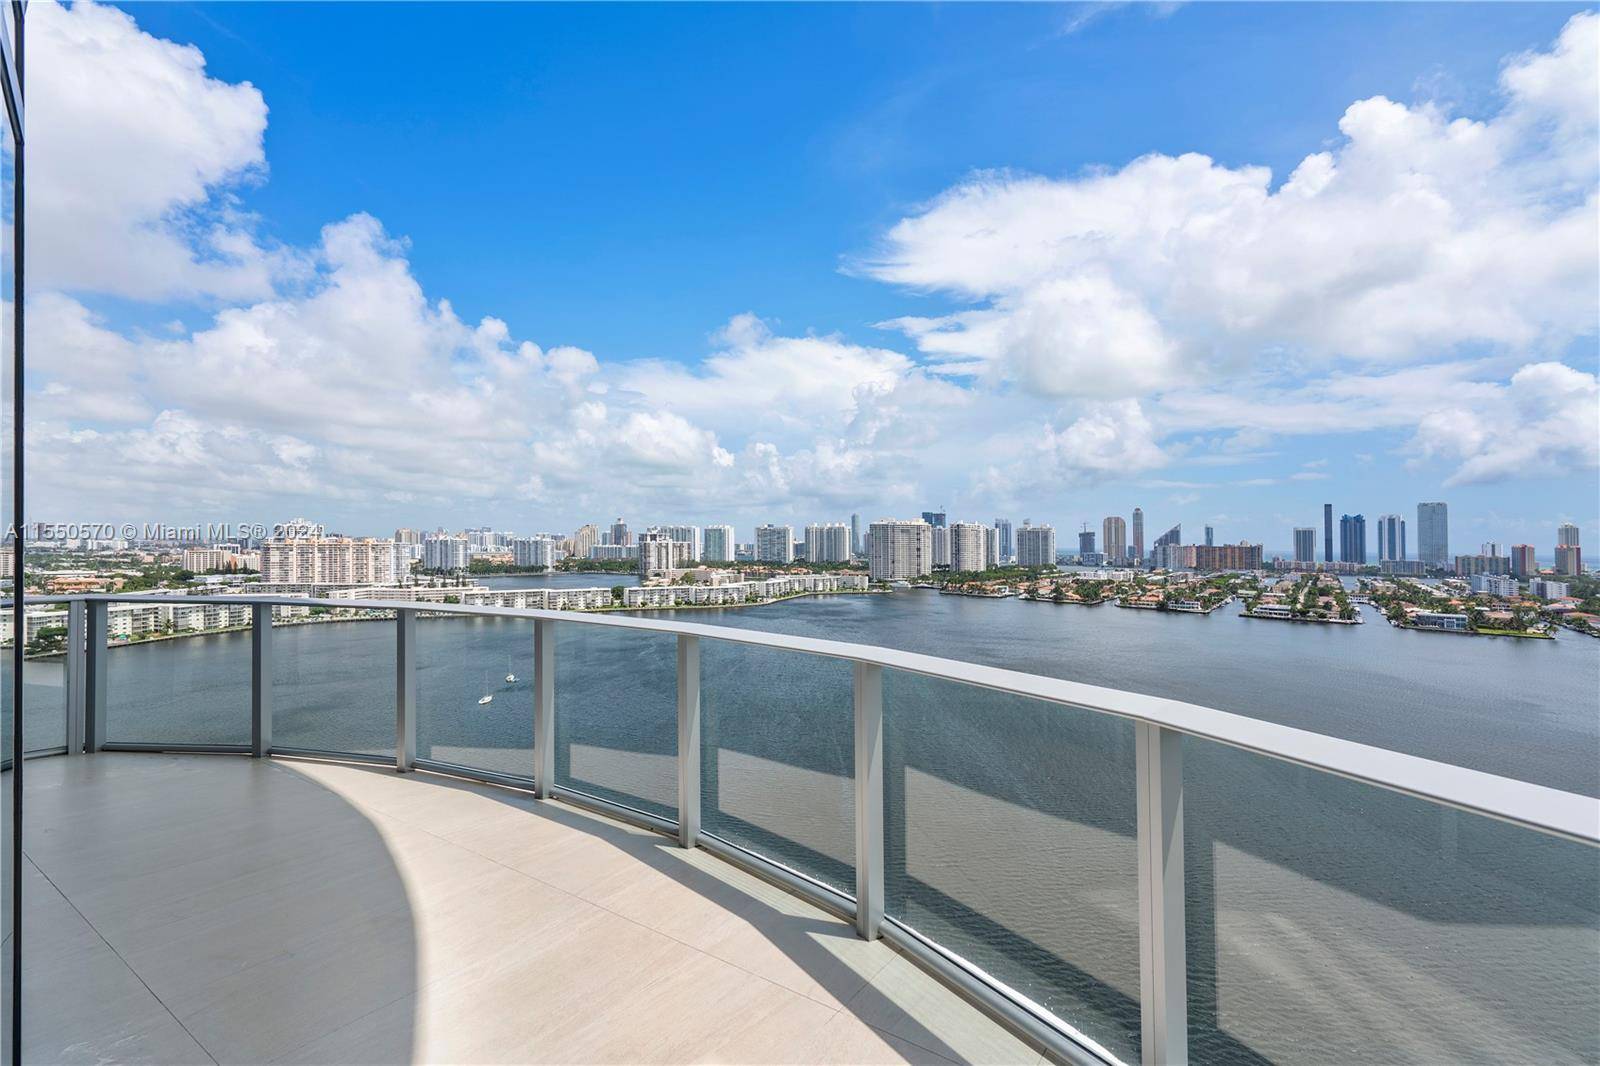 Immerse yourself in luxury waterfront living at Marina Palm, Unit 2111, North Miami Beach, FL.